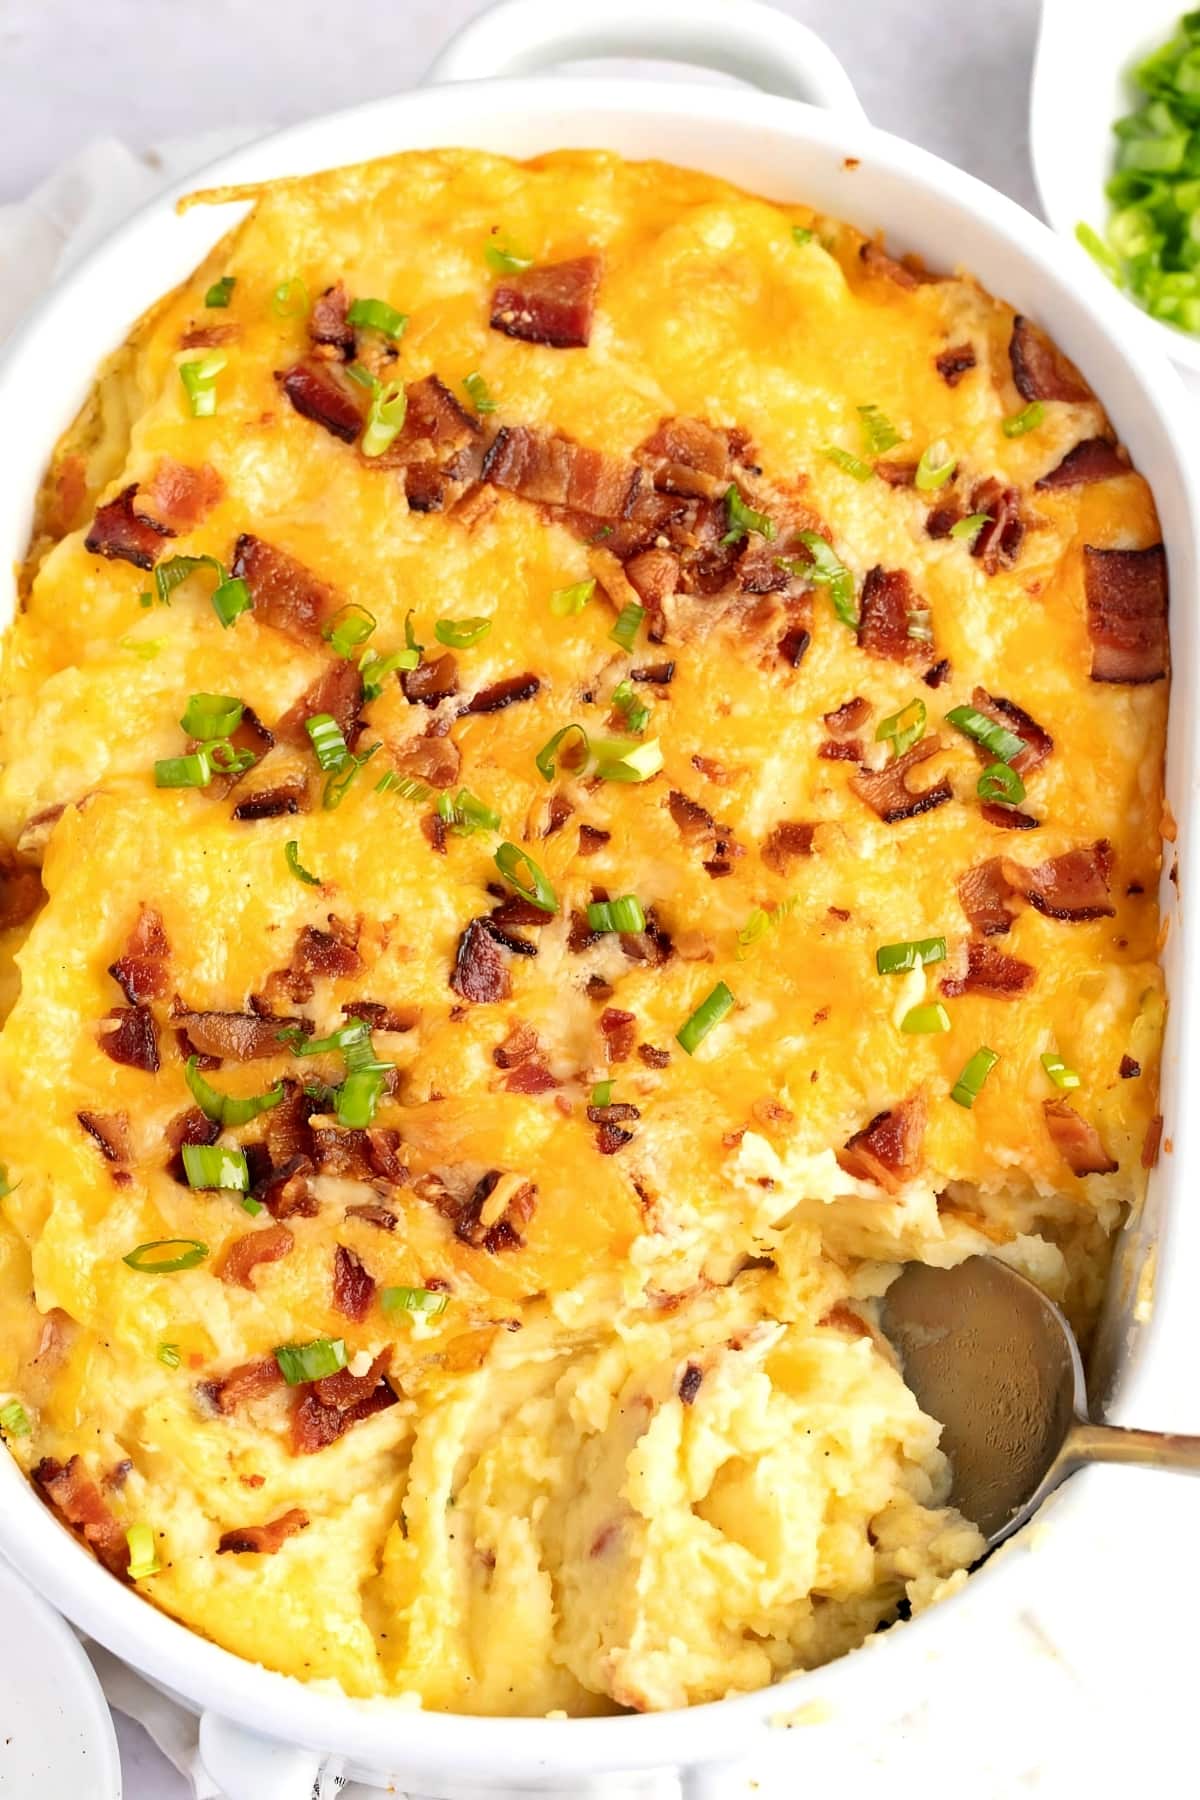 Loaded Mashed Potatoes with Bacon, Melted Cheese and Green Onions